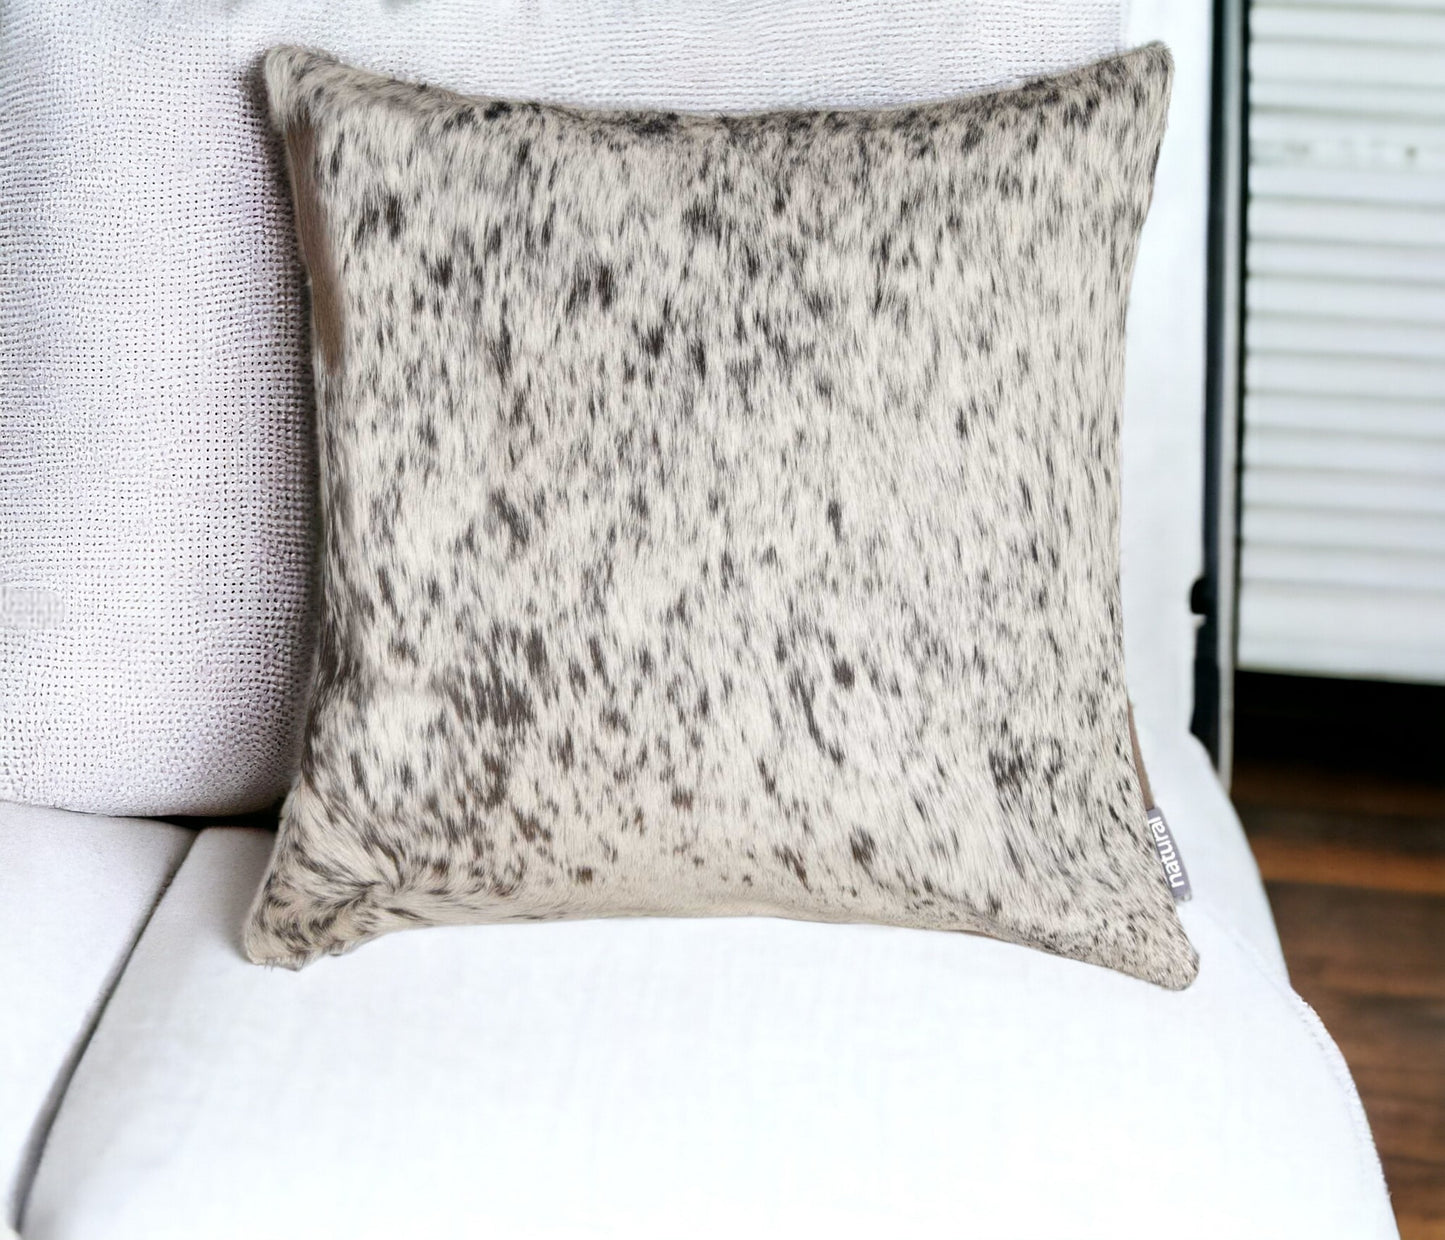 18" Gray and White Cowhide Throw Pillow